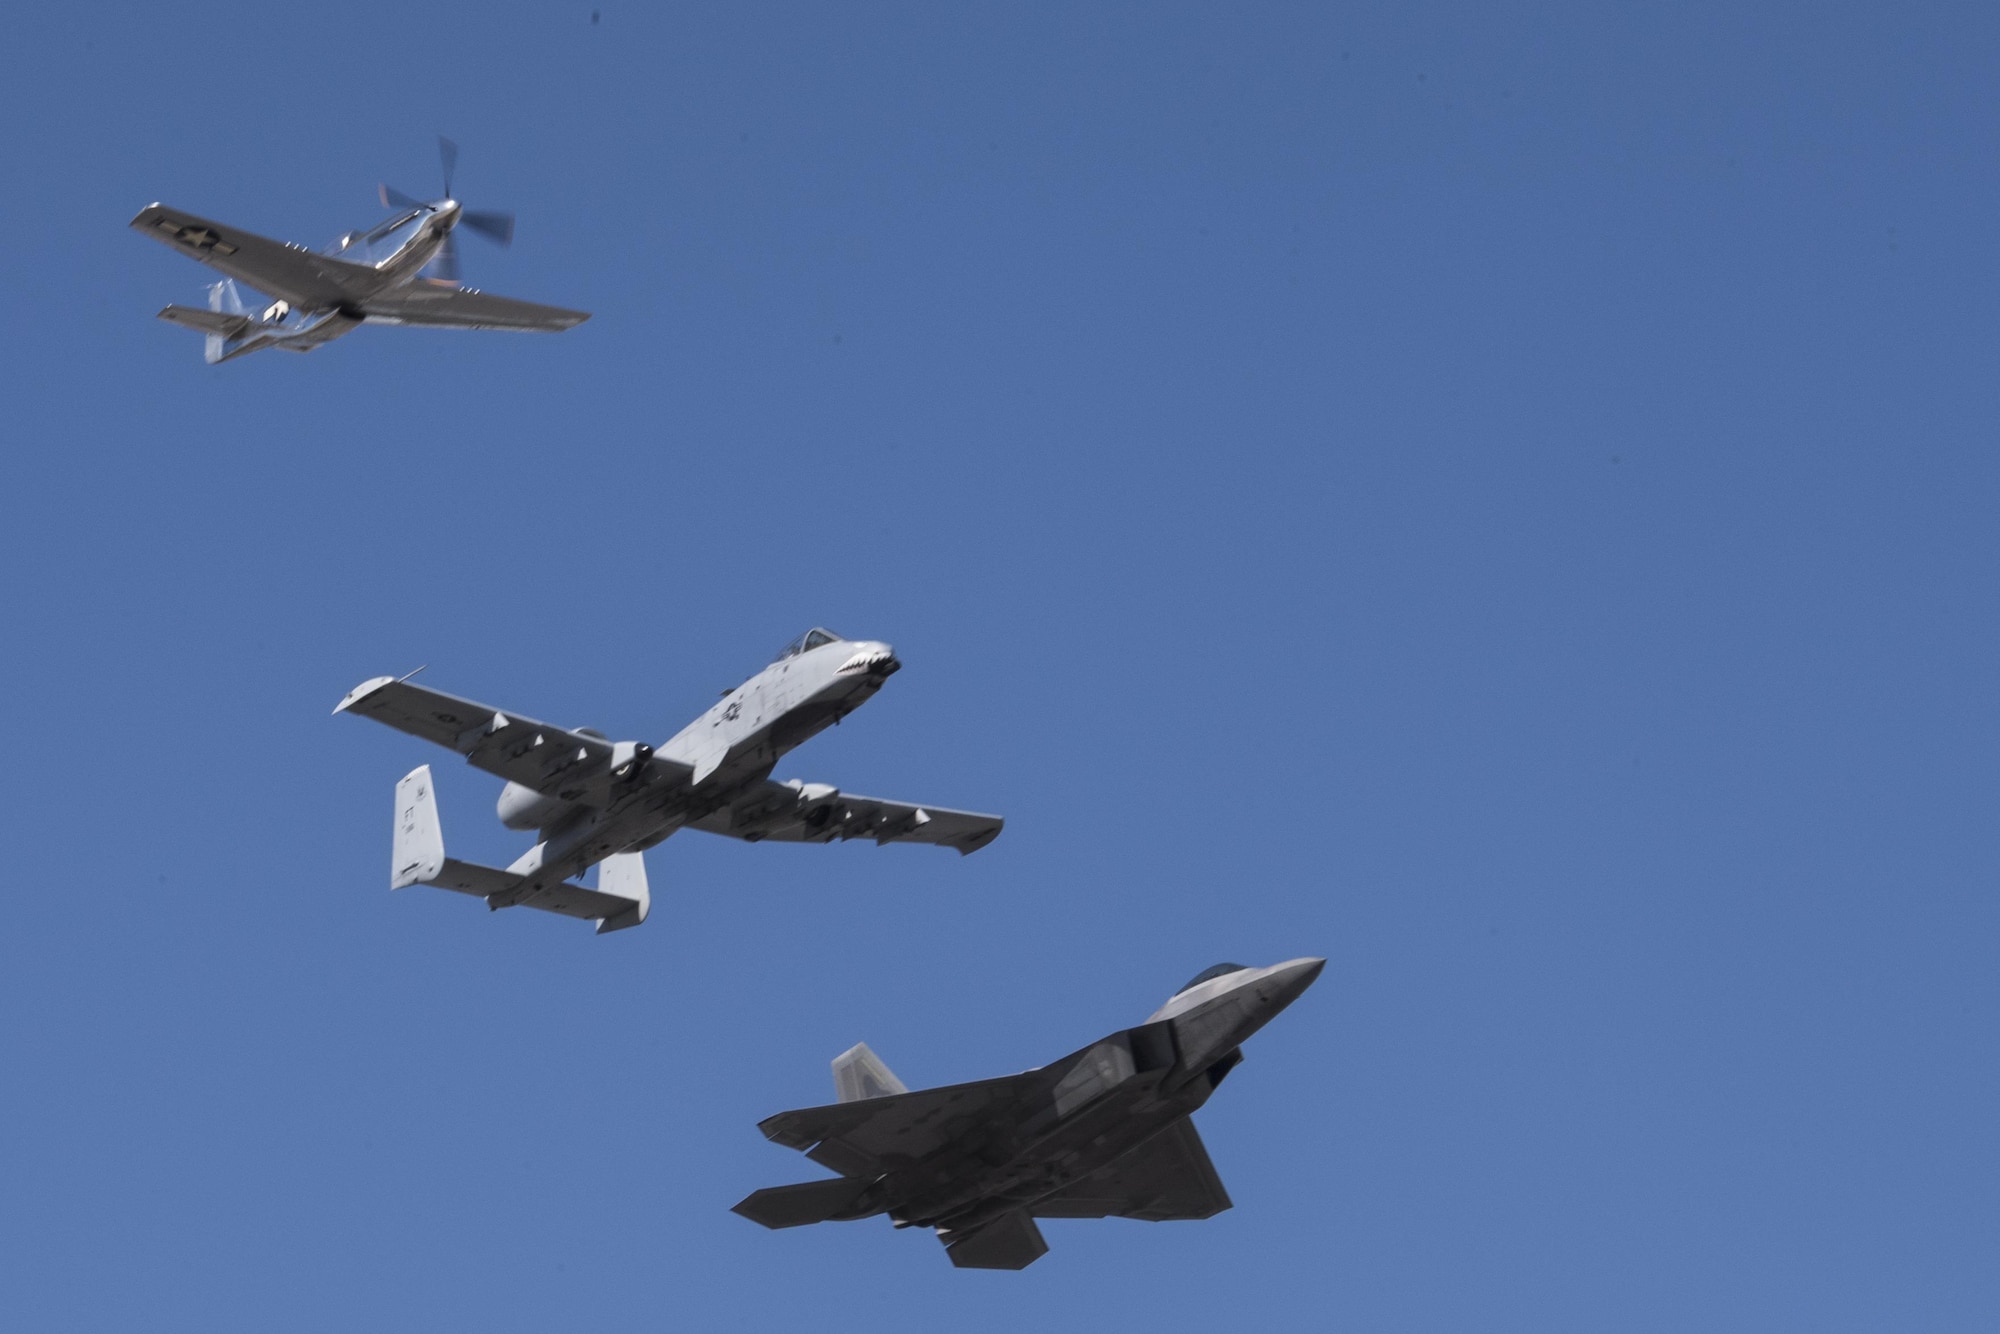 A P-51 Mustang, an A-10C Thunderbolt II and a F-22 Raptor perform a heritage flight during the Naval Air Station Jacksonville Air Show, Nov. 3, 2017, at NAS Jacksonville, Nov. 3, 2017, at NAS Jacksonville, Fla. The U.S. Air Force Heritage Flight program showcases past, present and future aircraft to spectators at air shows around the world. (U.S. Air Force photo by Staff Sgt. Eric Summers Jr.)